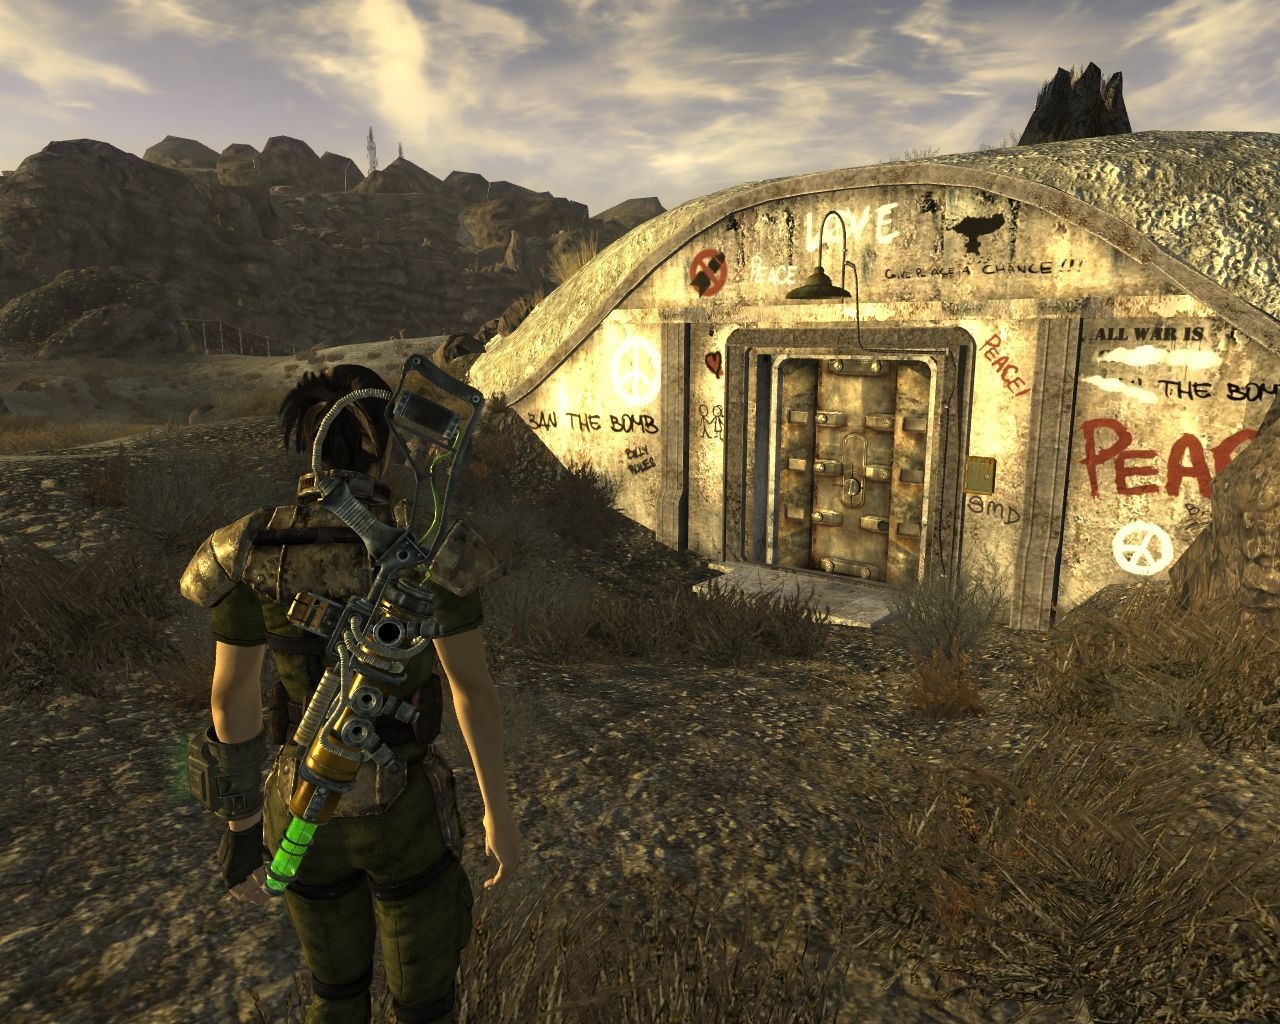 In New Vegas, if you want peace, you must prepare for bloody gun battles.